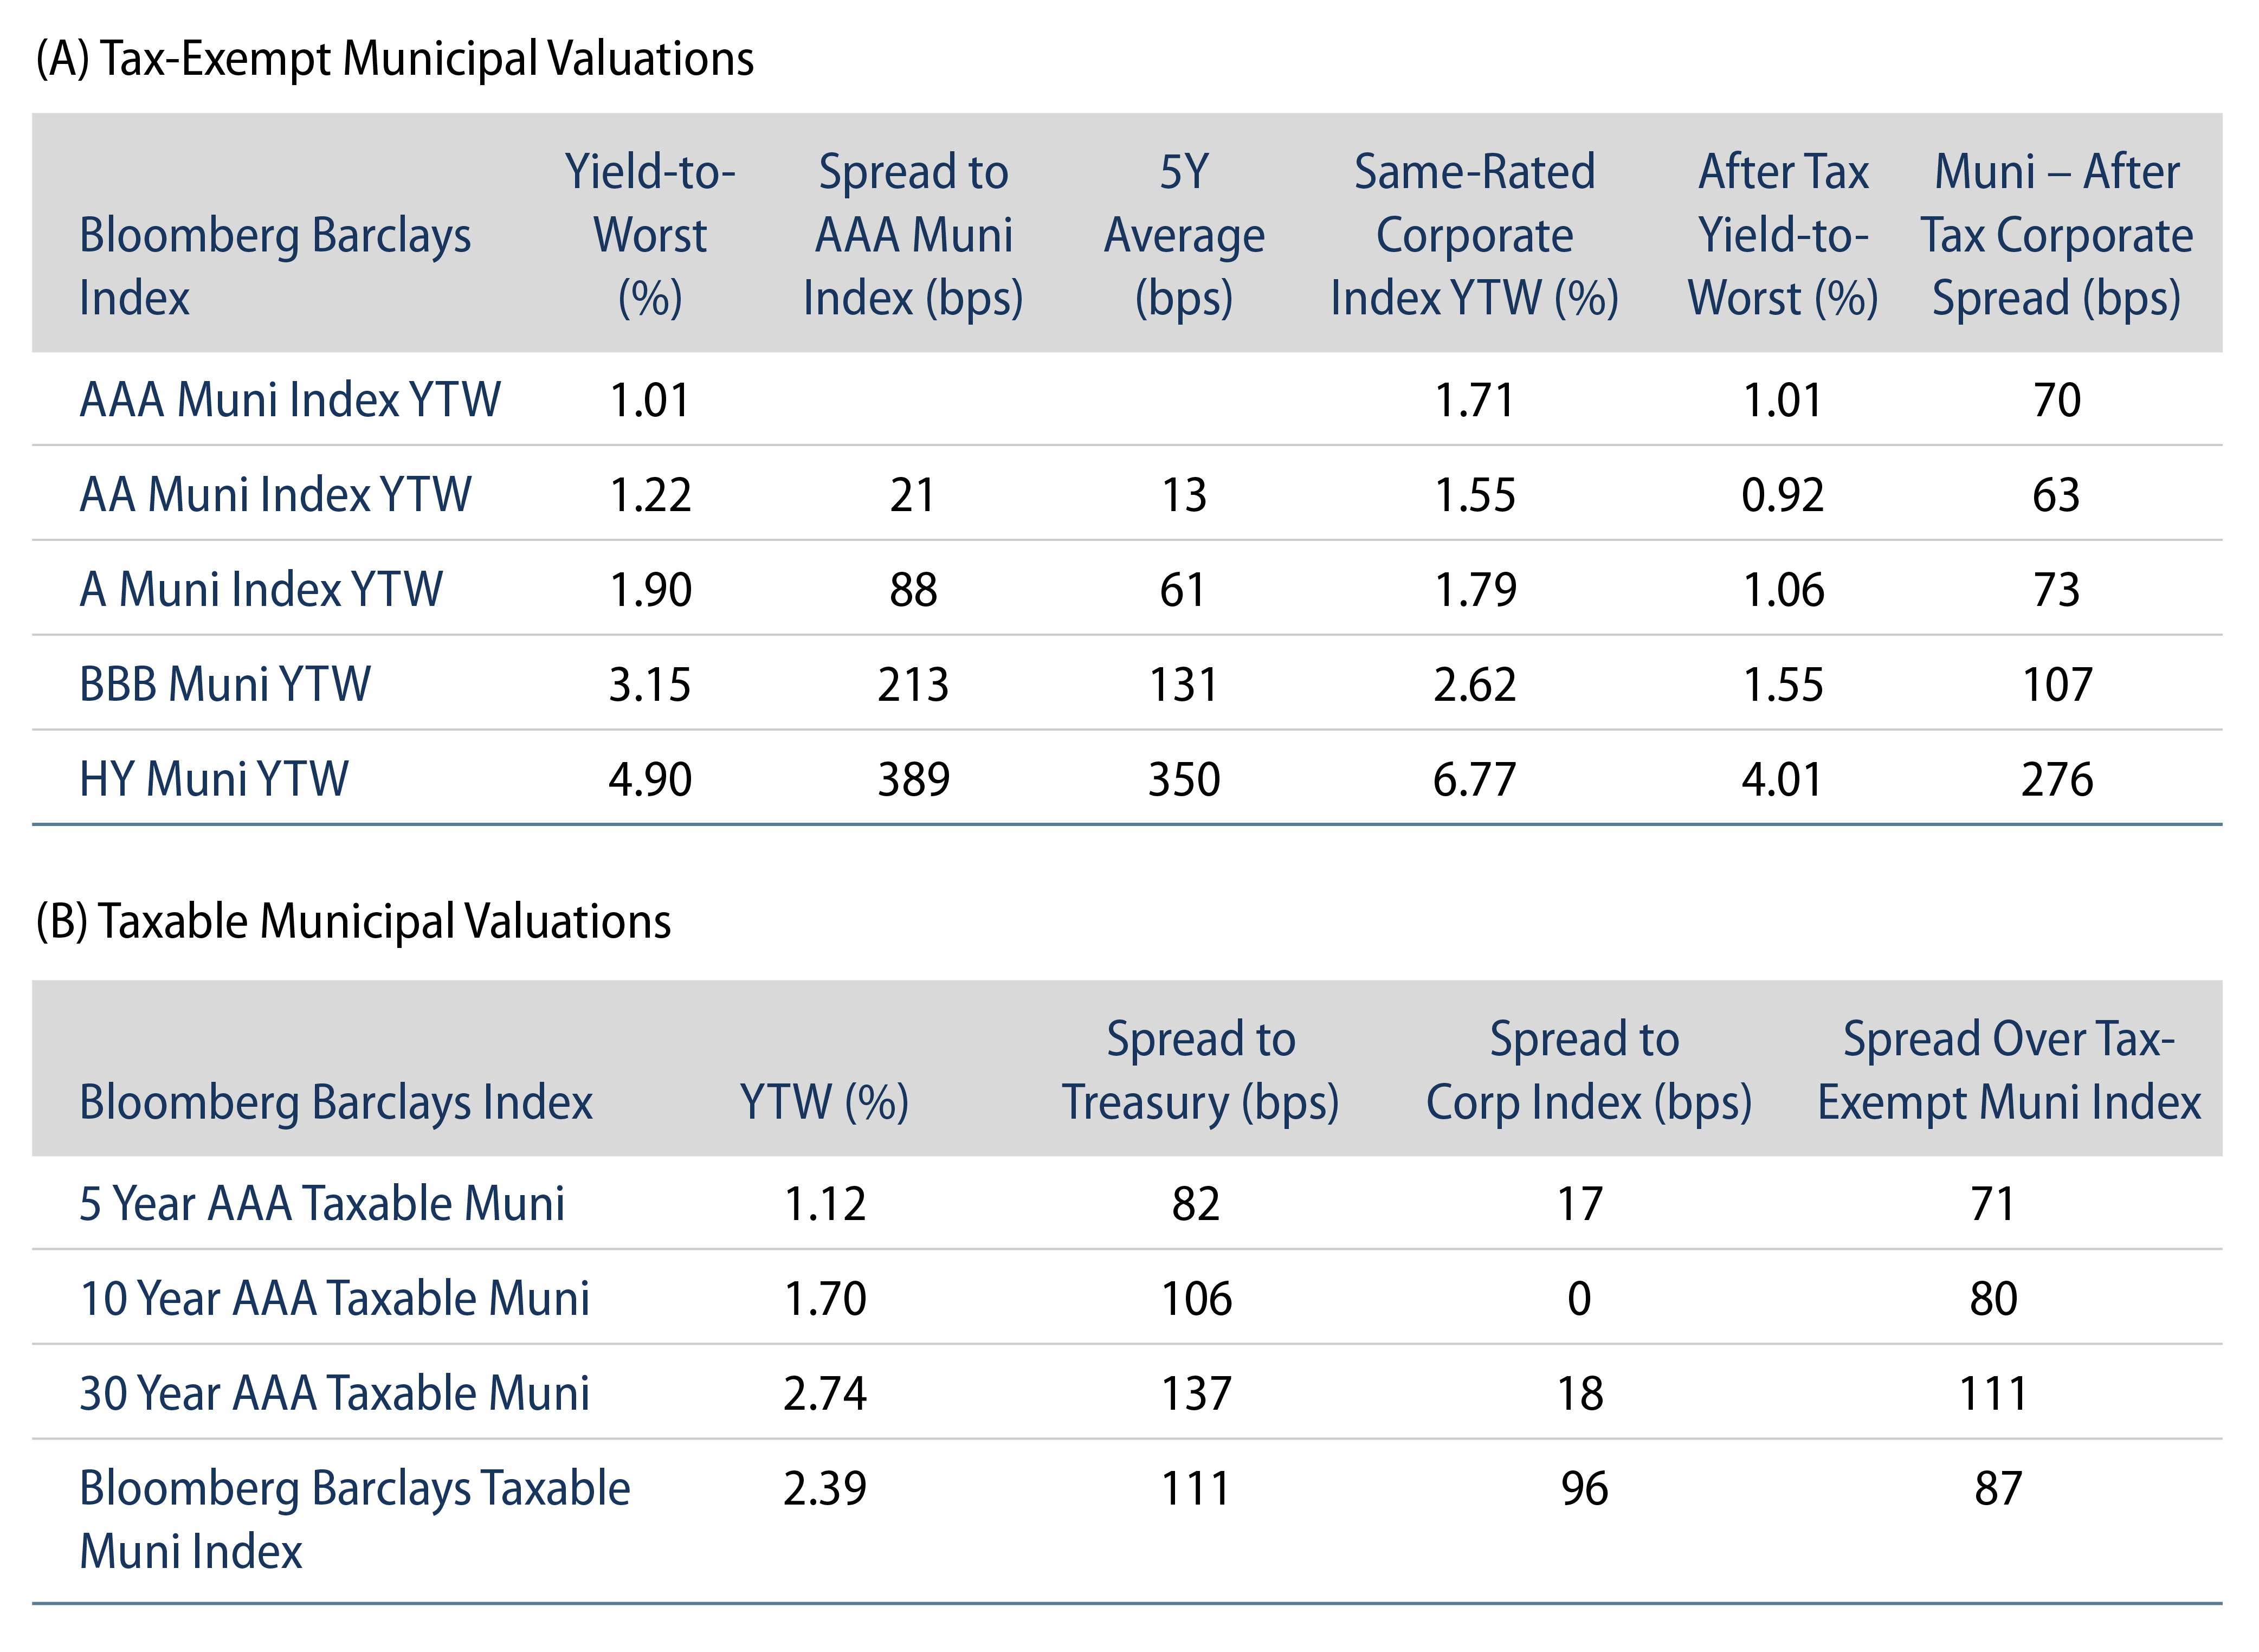 Explore Tax-Exempt and Taxable Municipal Valuations